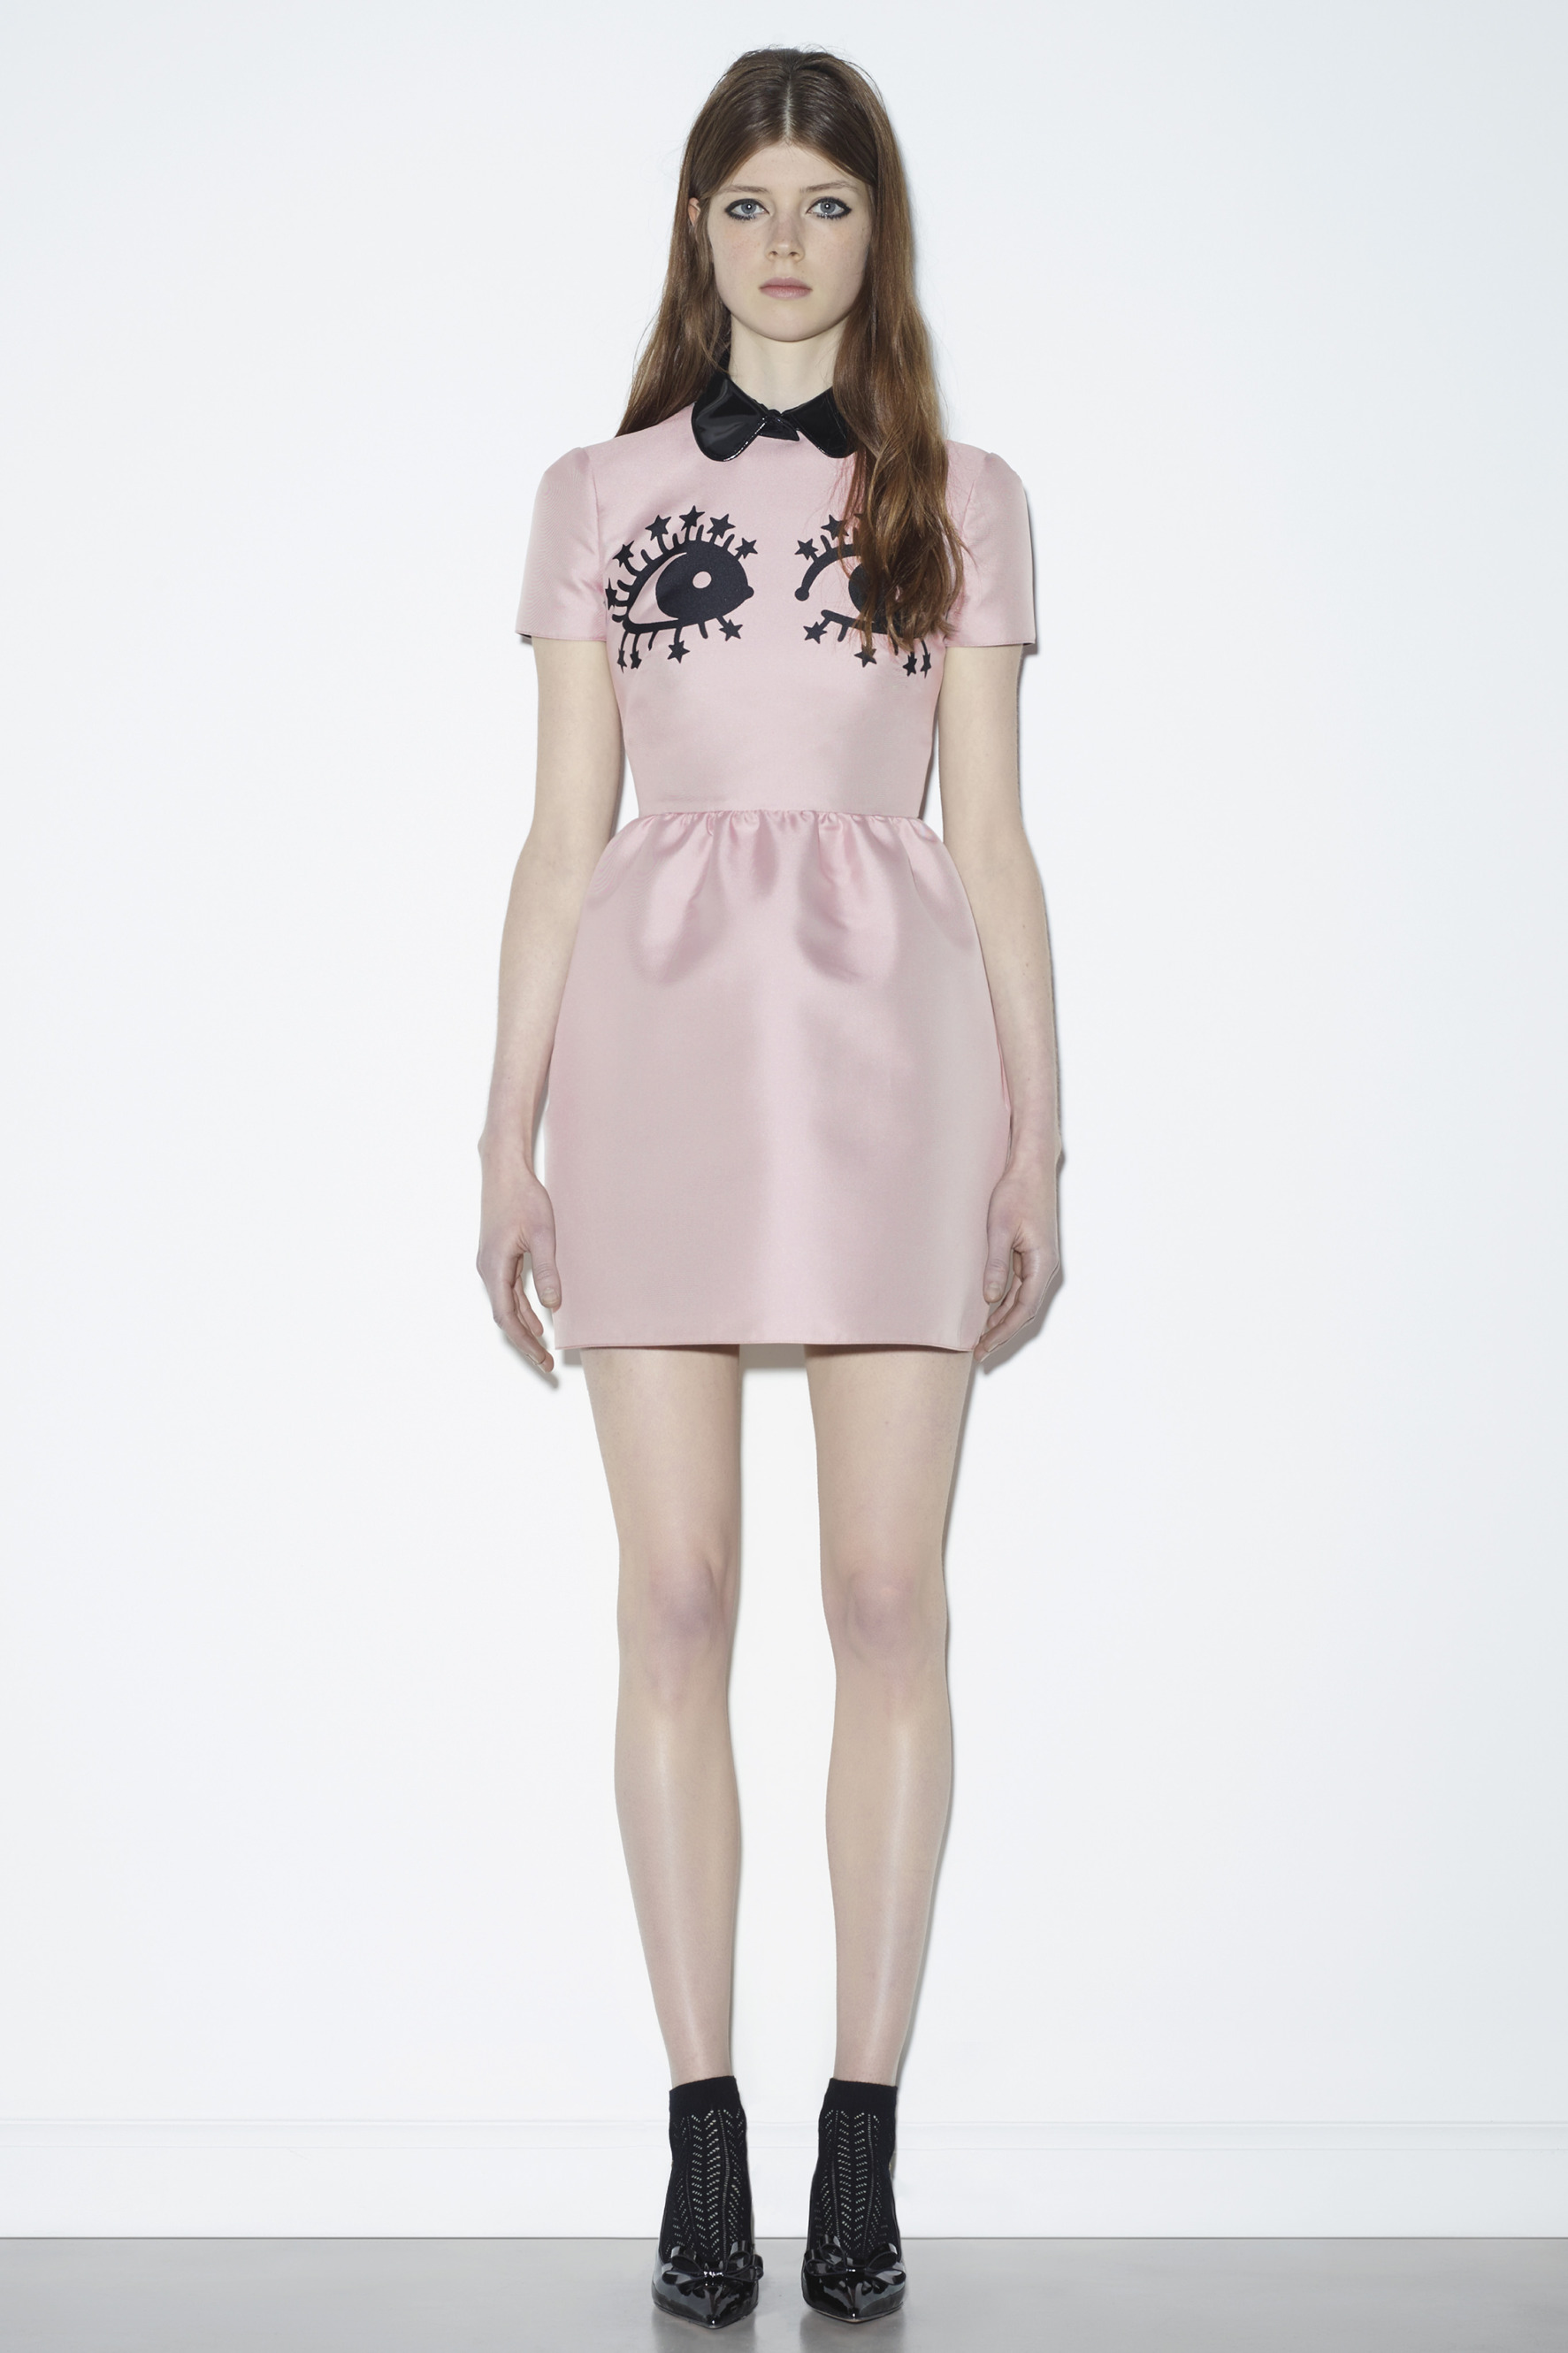 Red Valentino resort 2016 collection